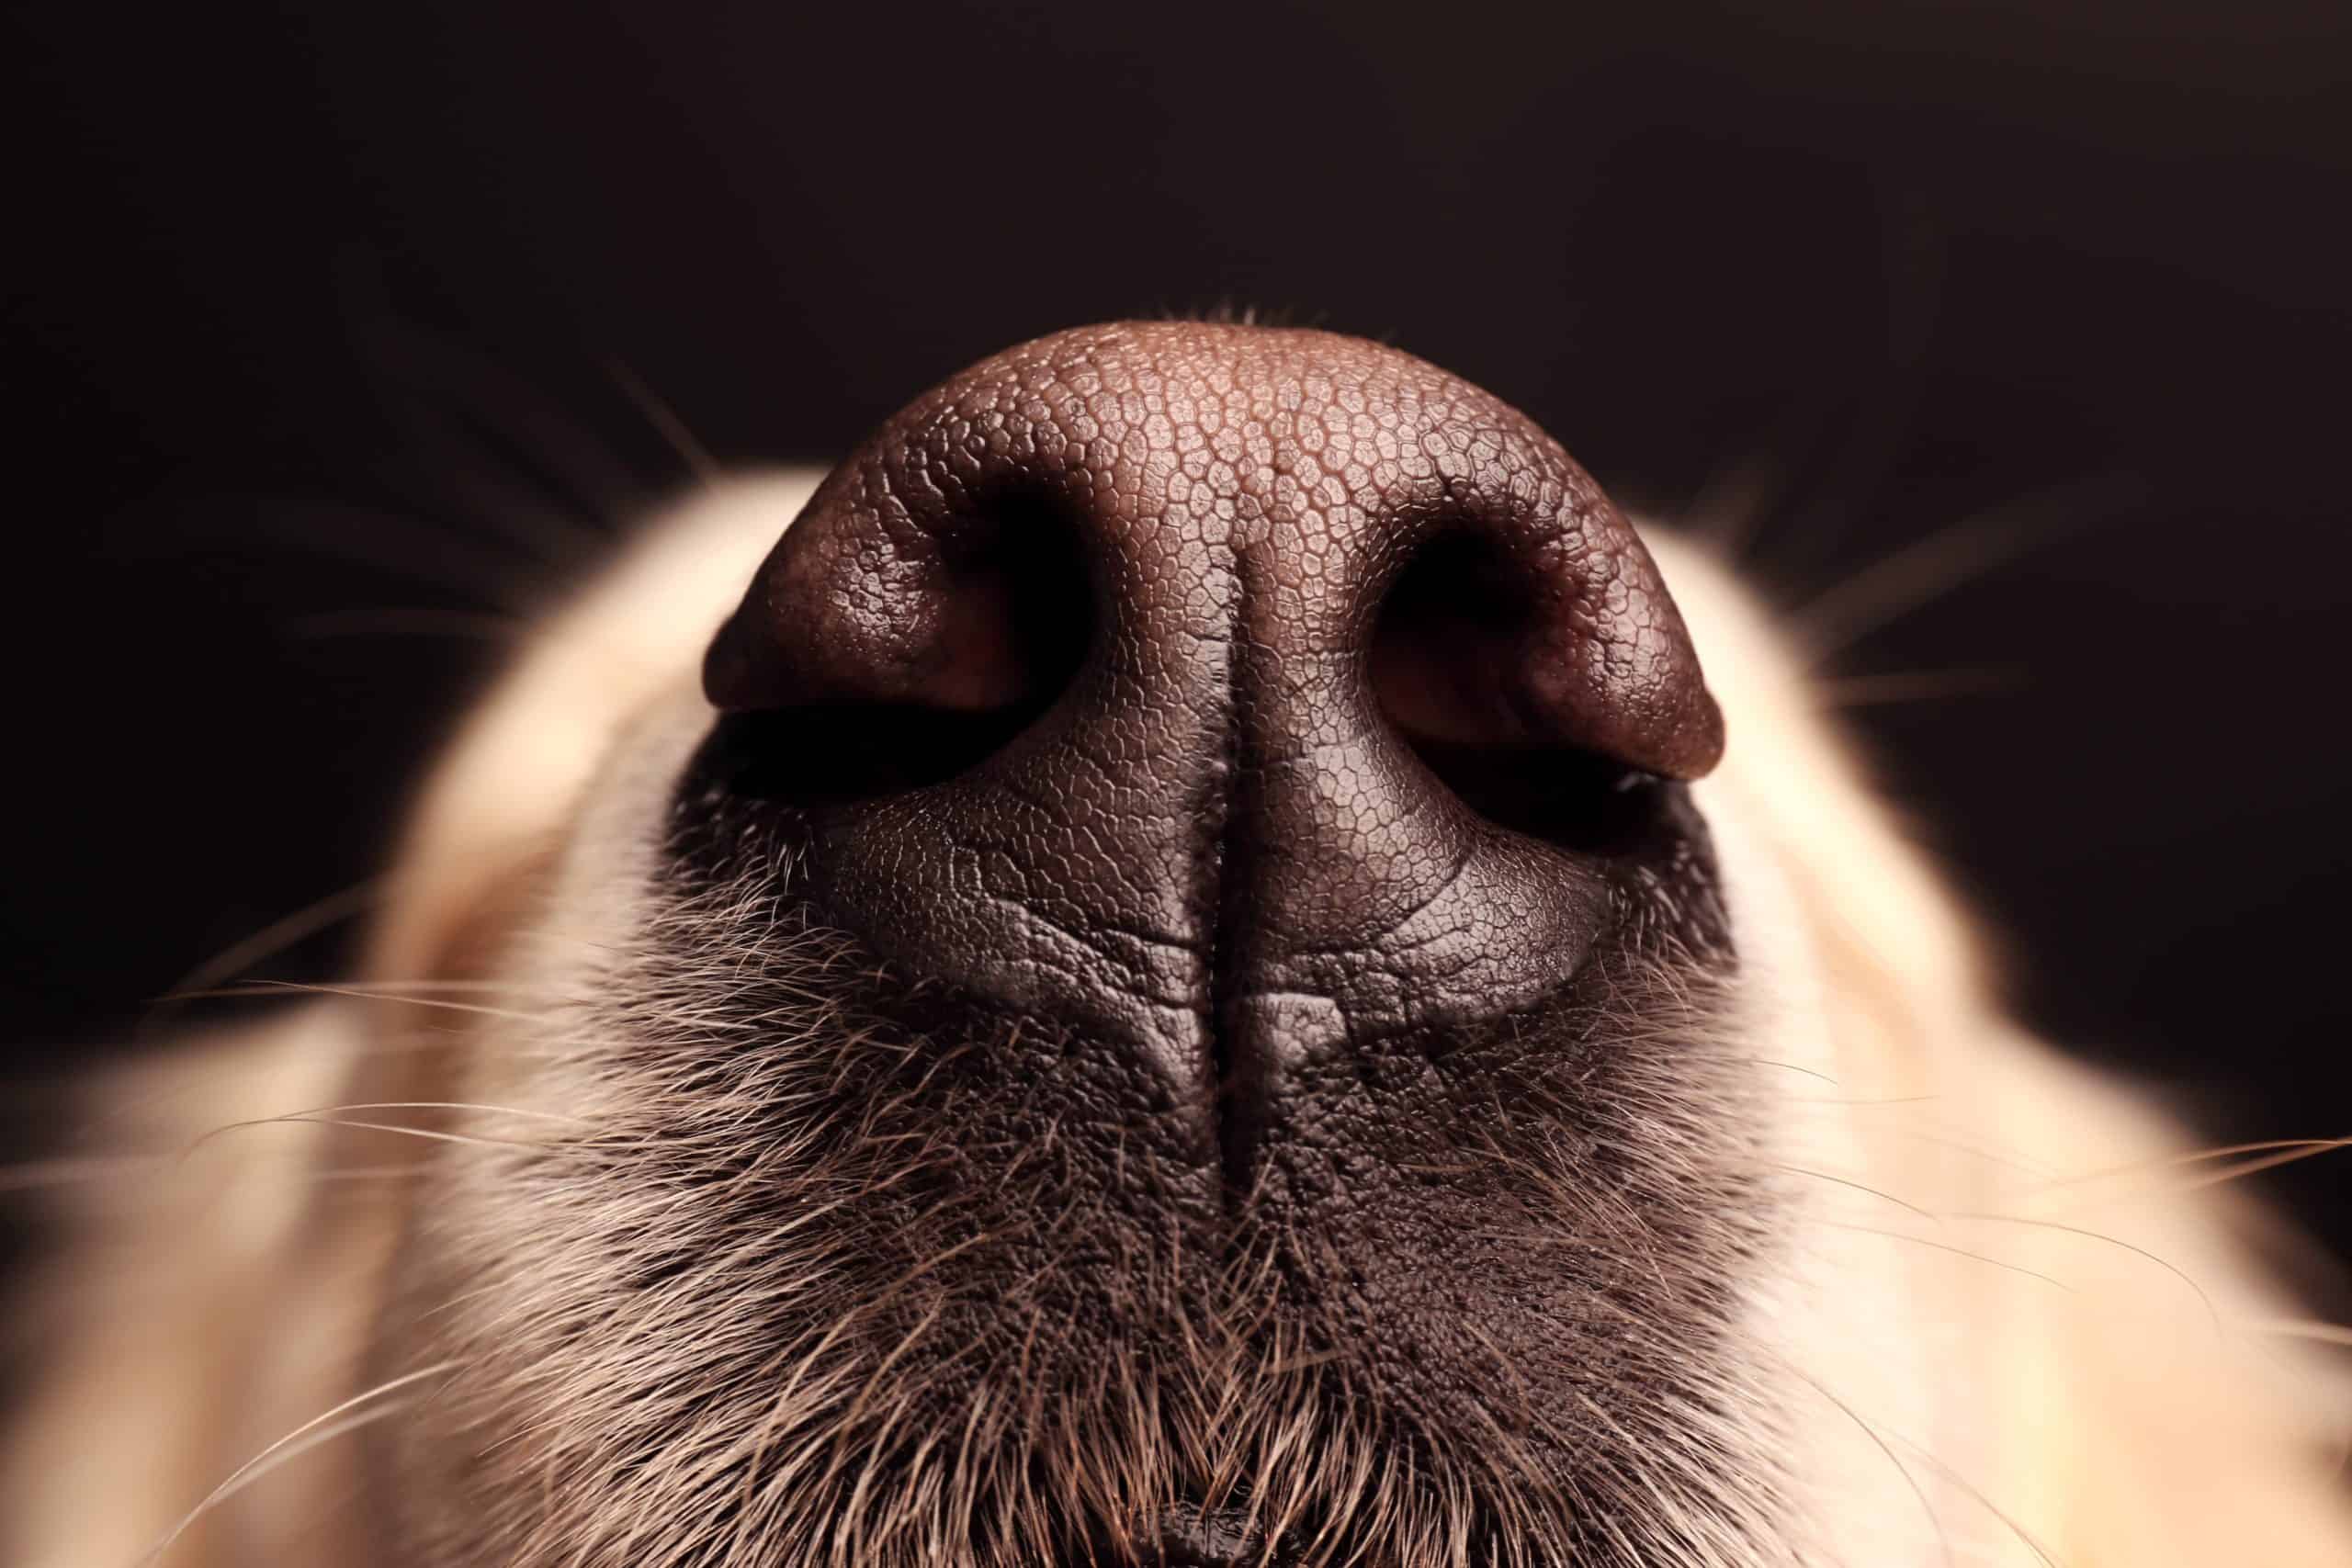 Closeup image of a dog's nose. Properly trained cancer-sniffing dogs can accurately distinguish a cancer sample from a noncancerous sample.